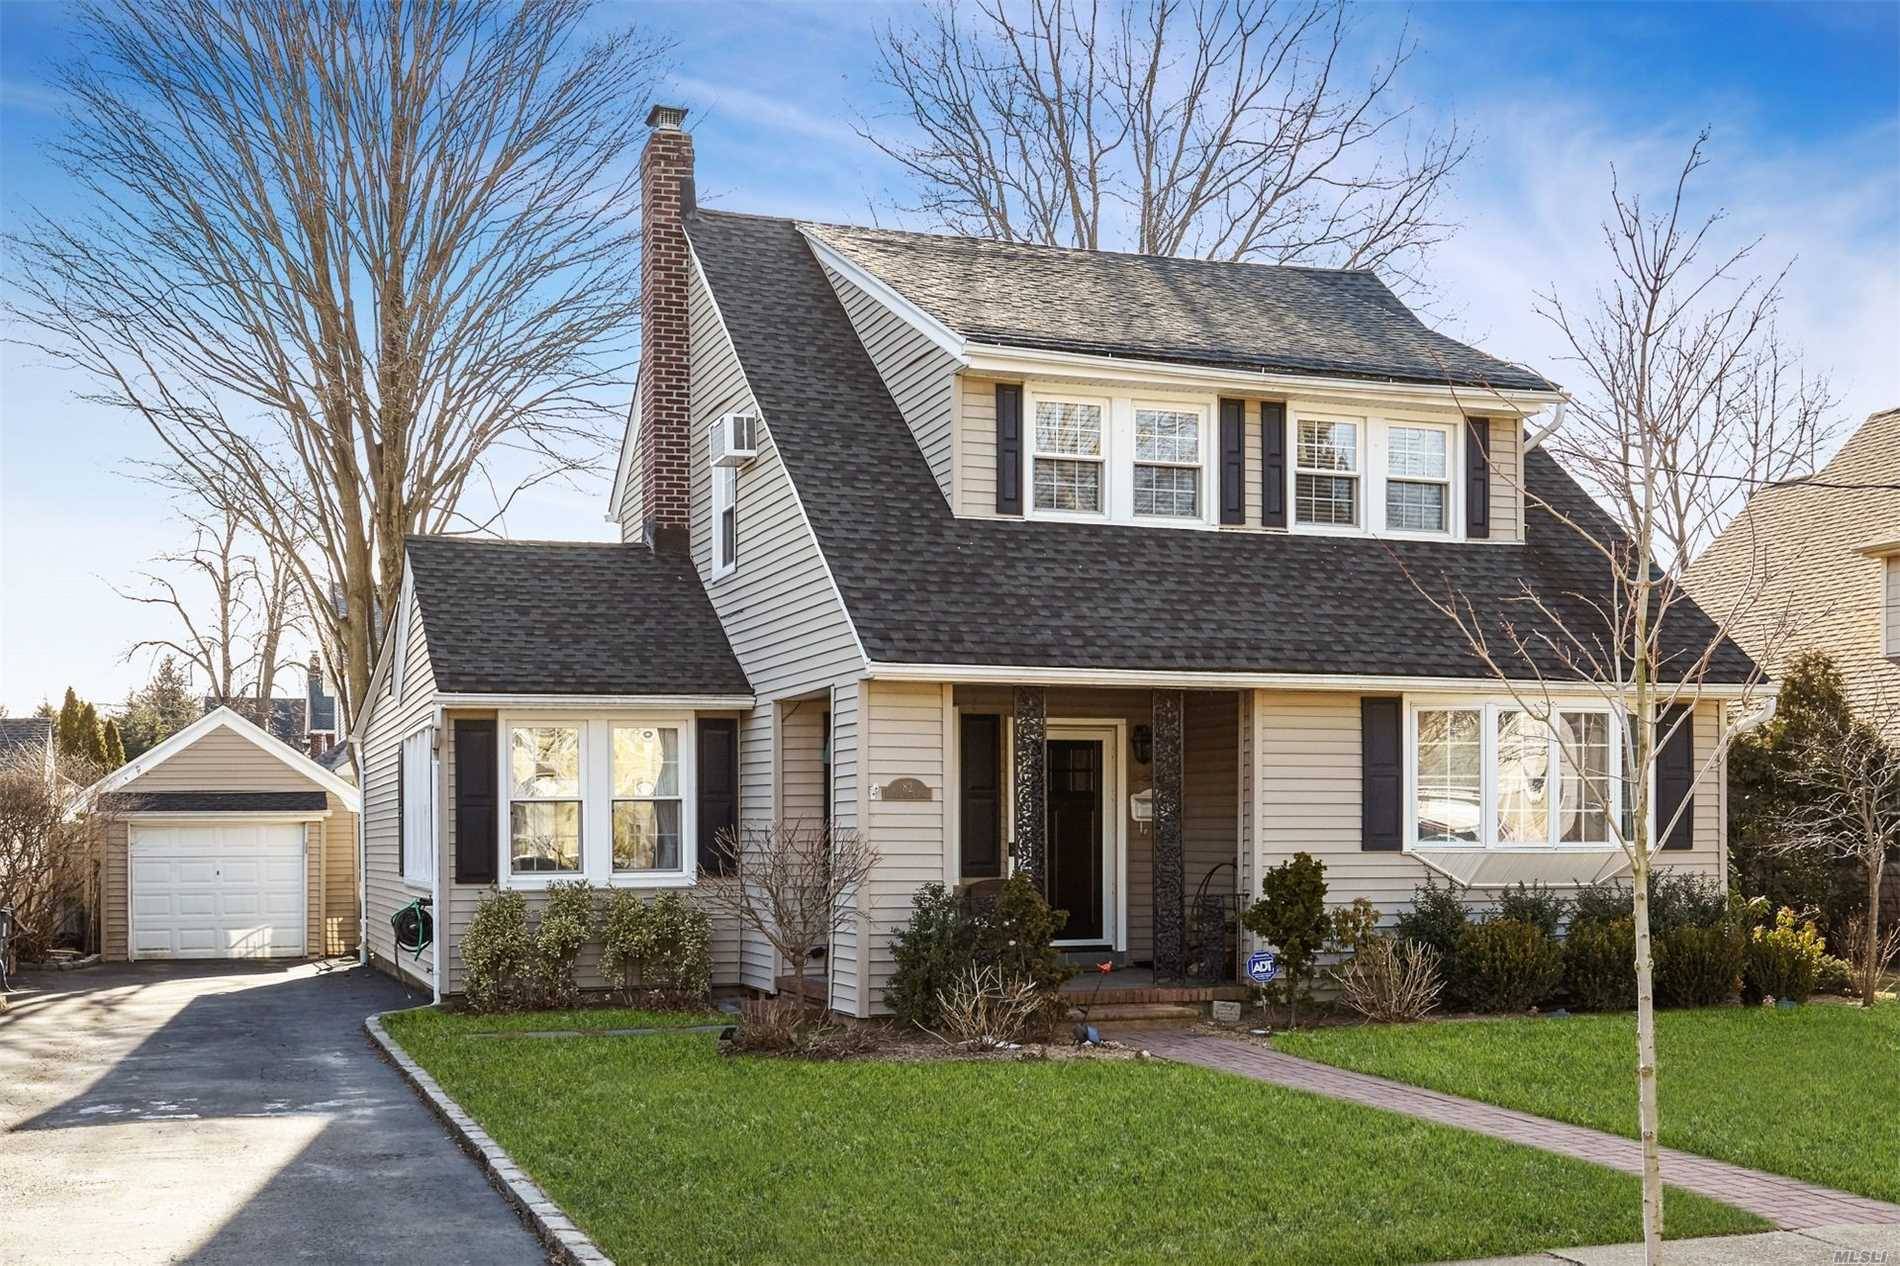 Welcome Home To This Warm And Inviting 3 Bedroom/2 Bath Colonial.